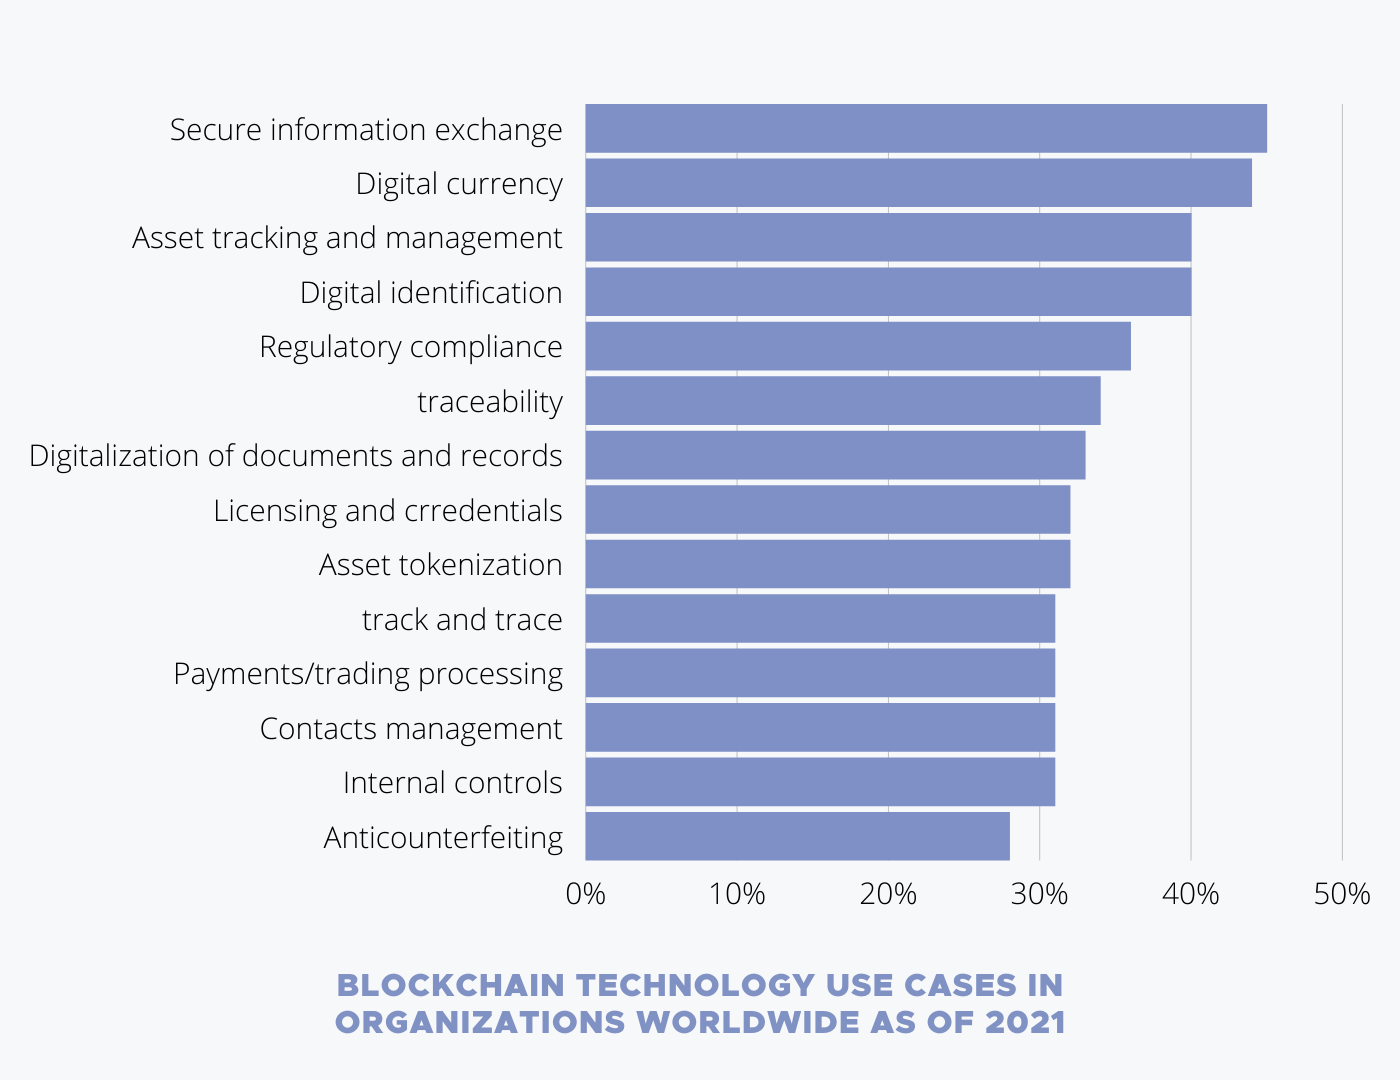 Blockchain technology use cases in organizations worldwide as of 2021